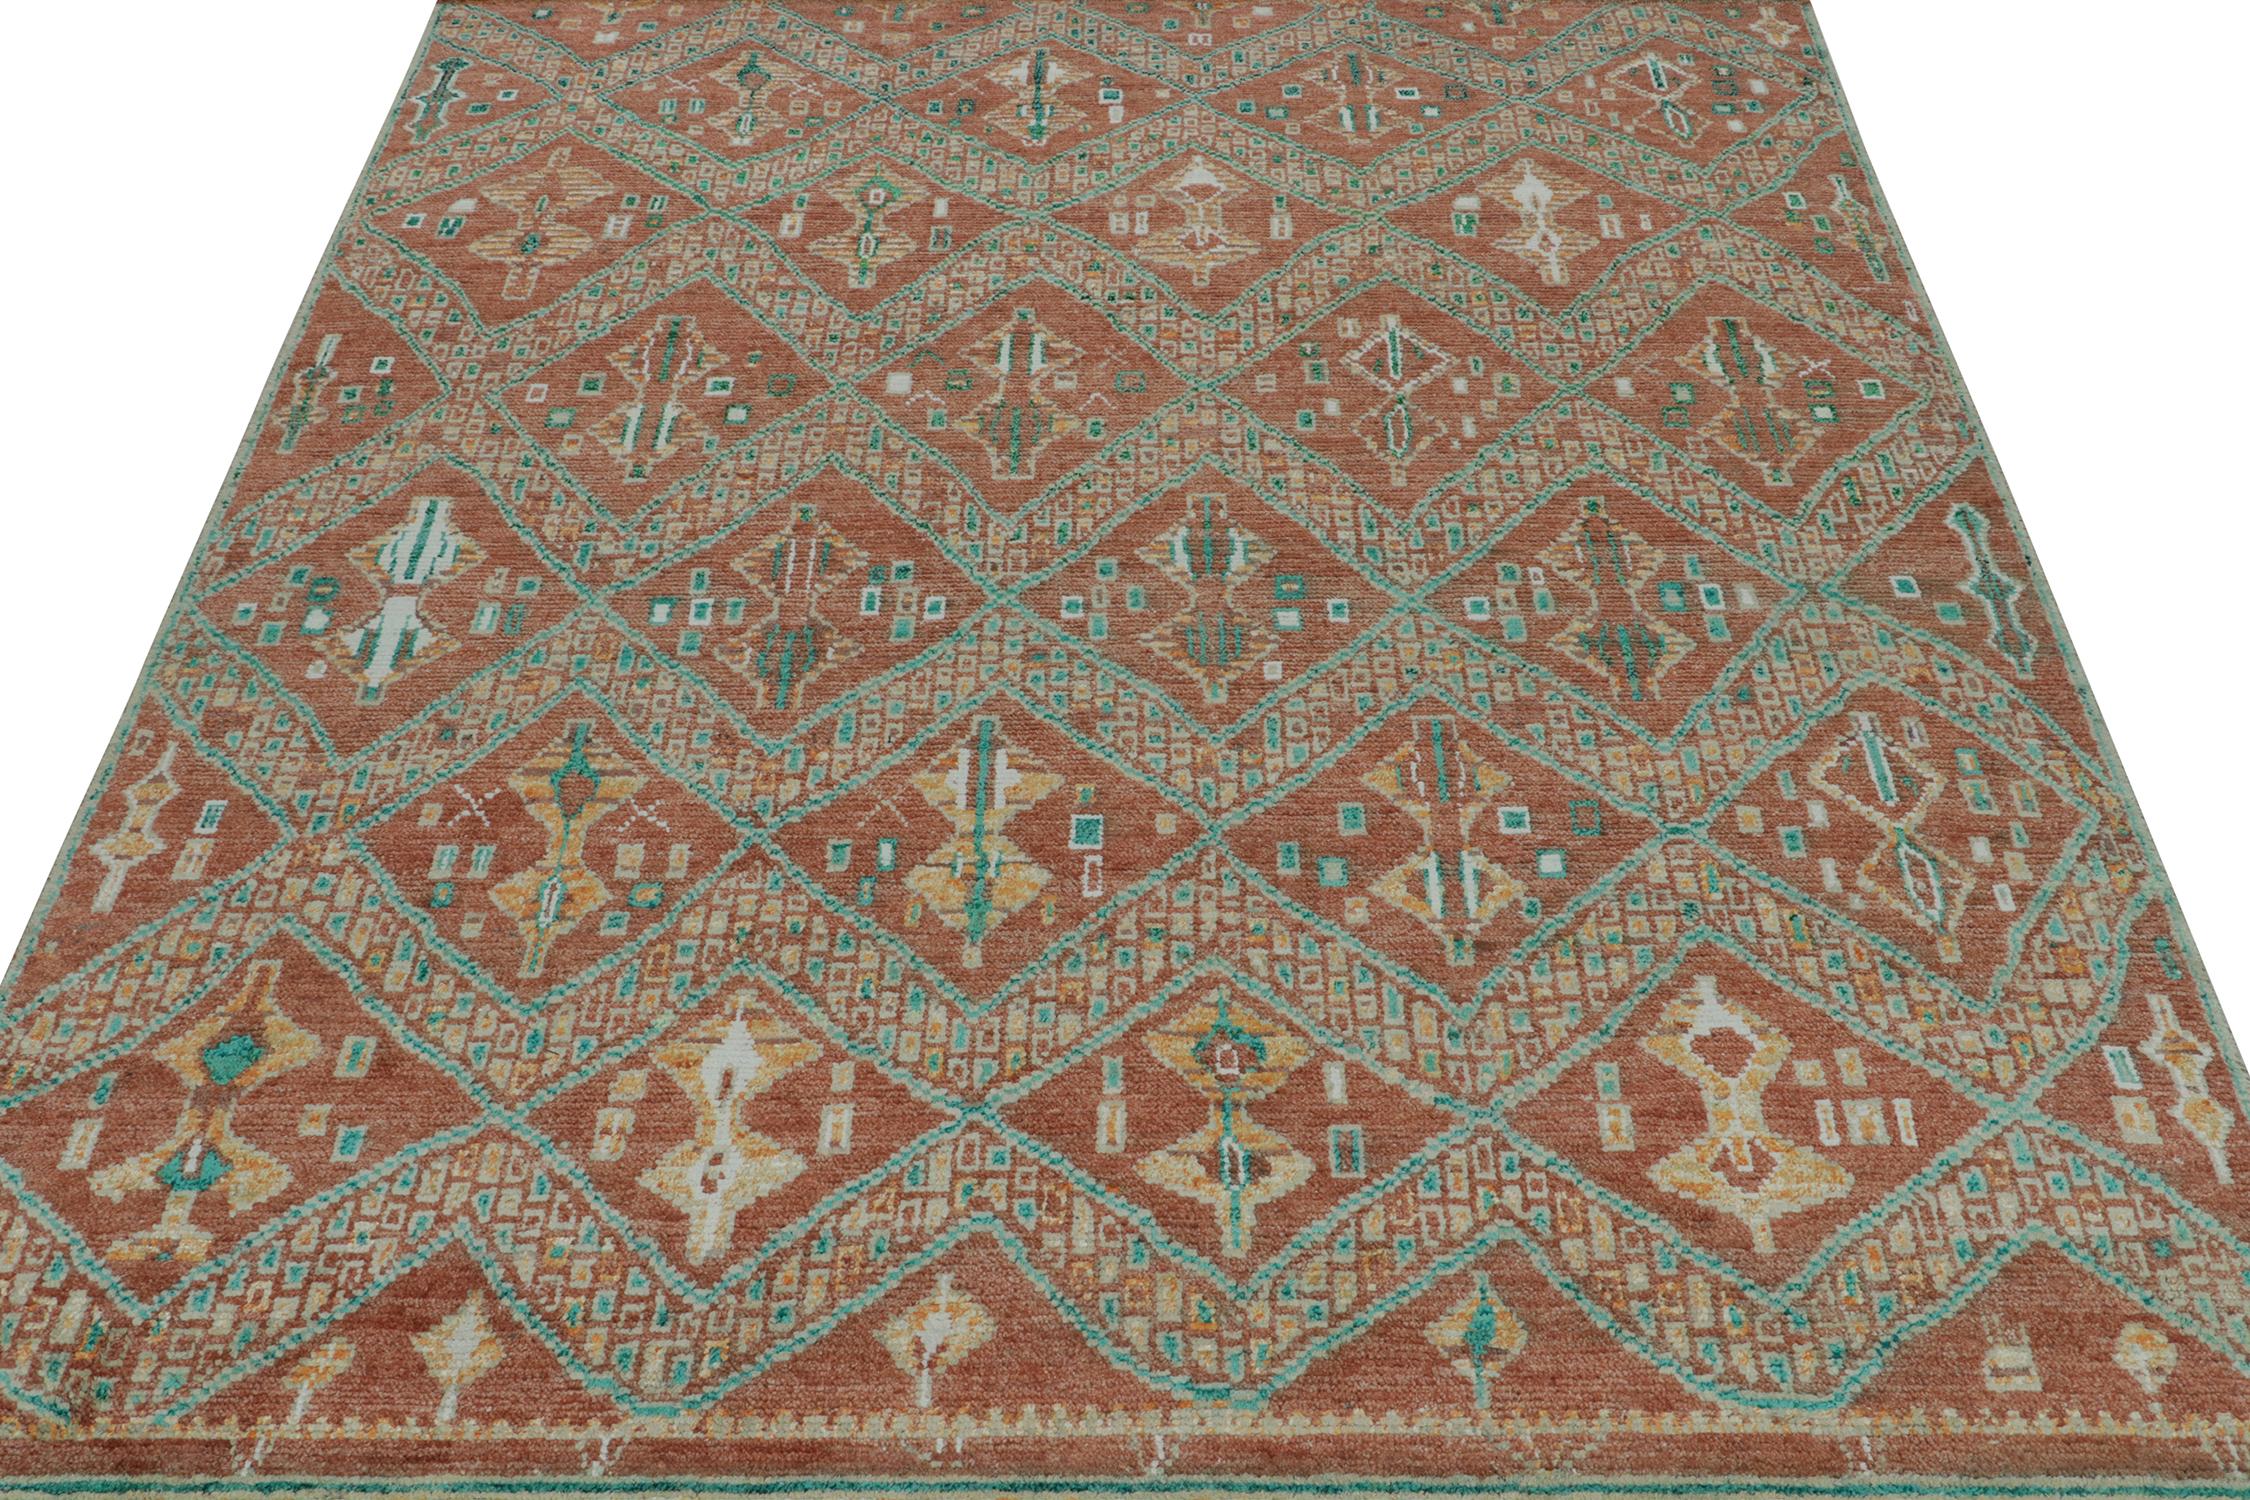 This contemporary 8x10 rug is a grand entry in Rug & Kilim's new Moroccan Collection—a bold take on the iconic style. Hand-knotted in wool, silk, and cotton.
Further on the Design:
The piece draws on archaic lozenges and chevrons in rust red and